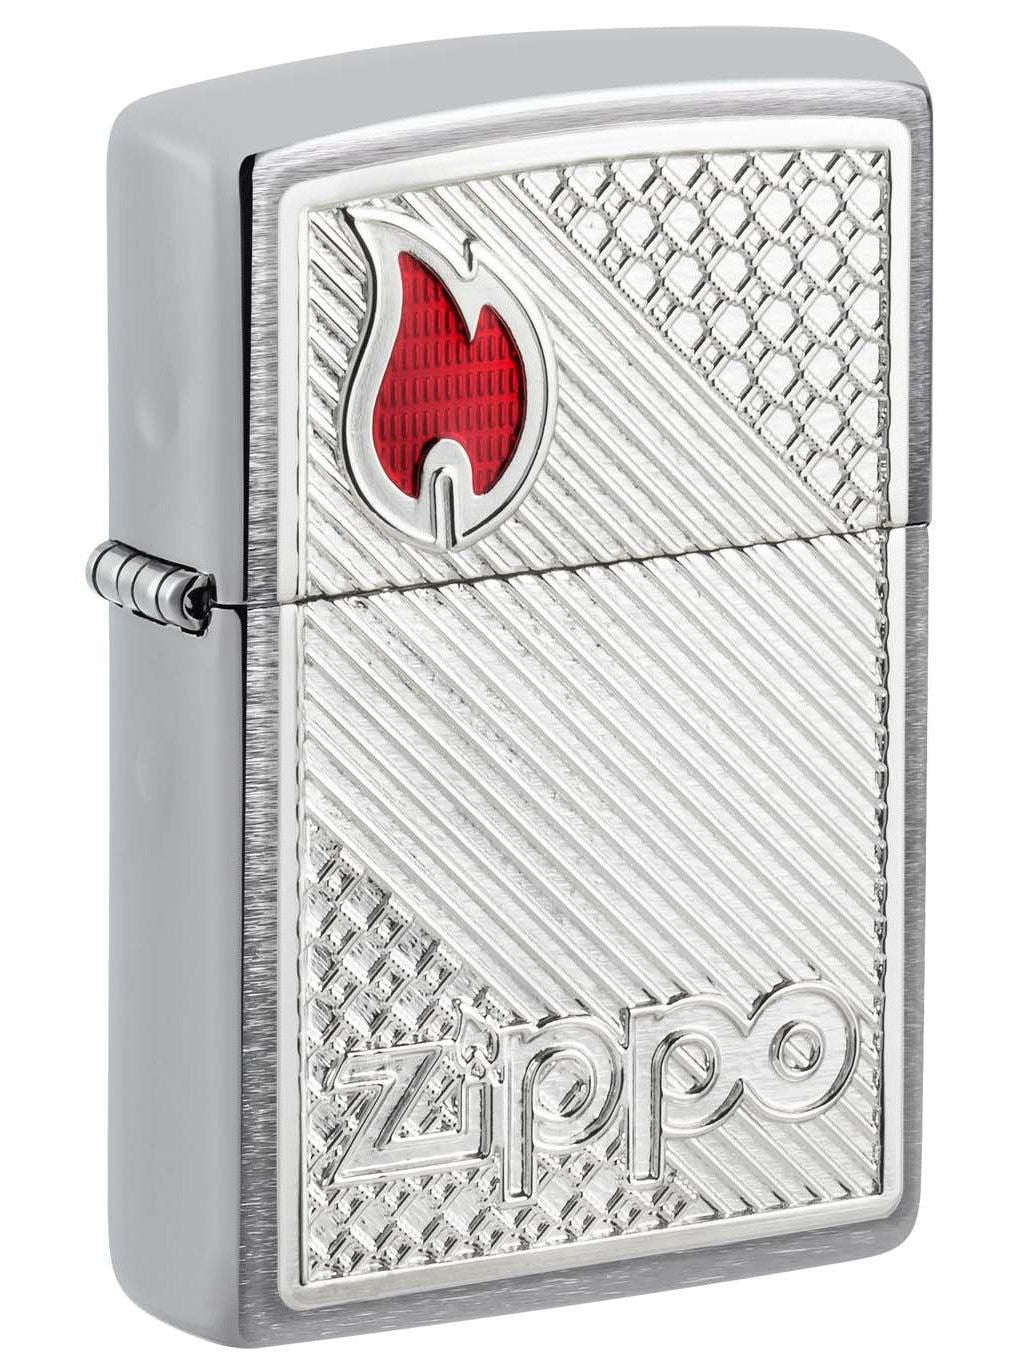 Zippo Lighter: Tiles Emblem with Flame - Brushed Chrome 48126